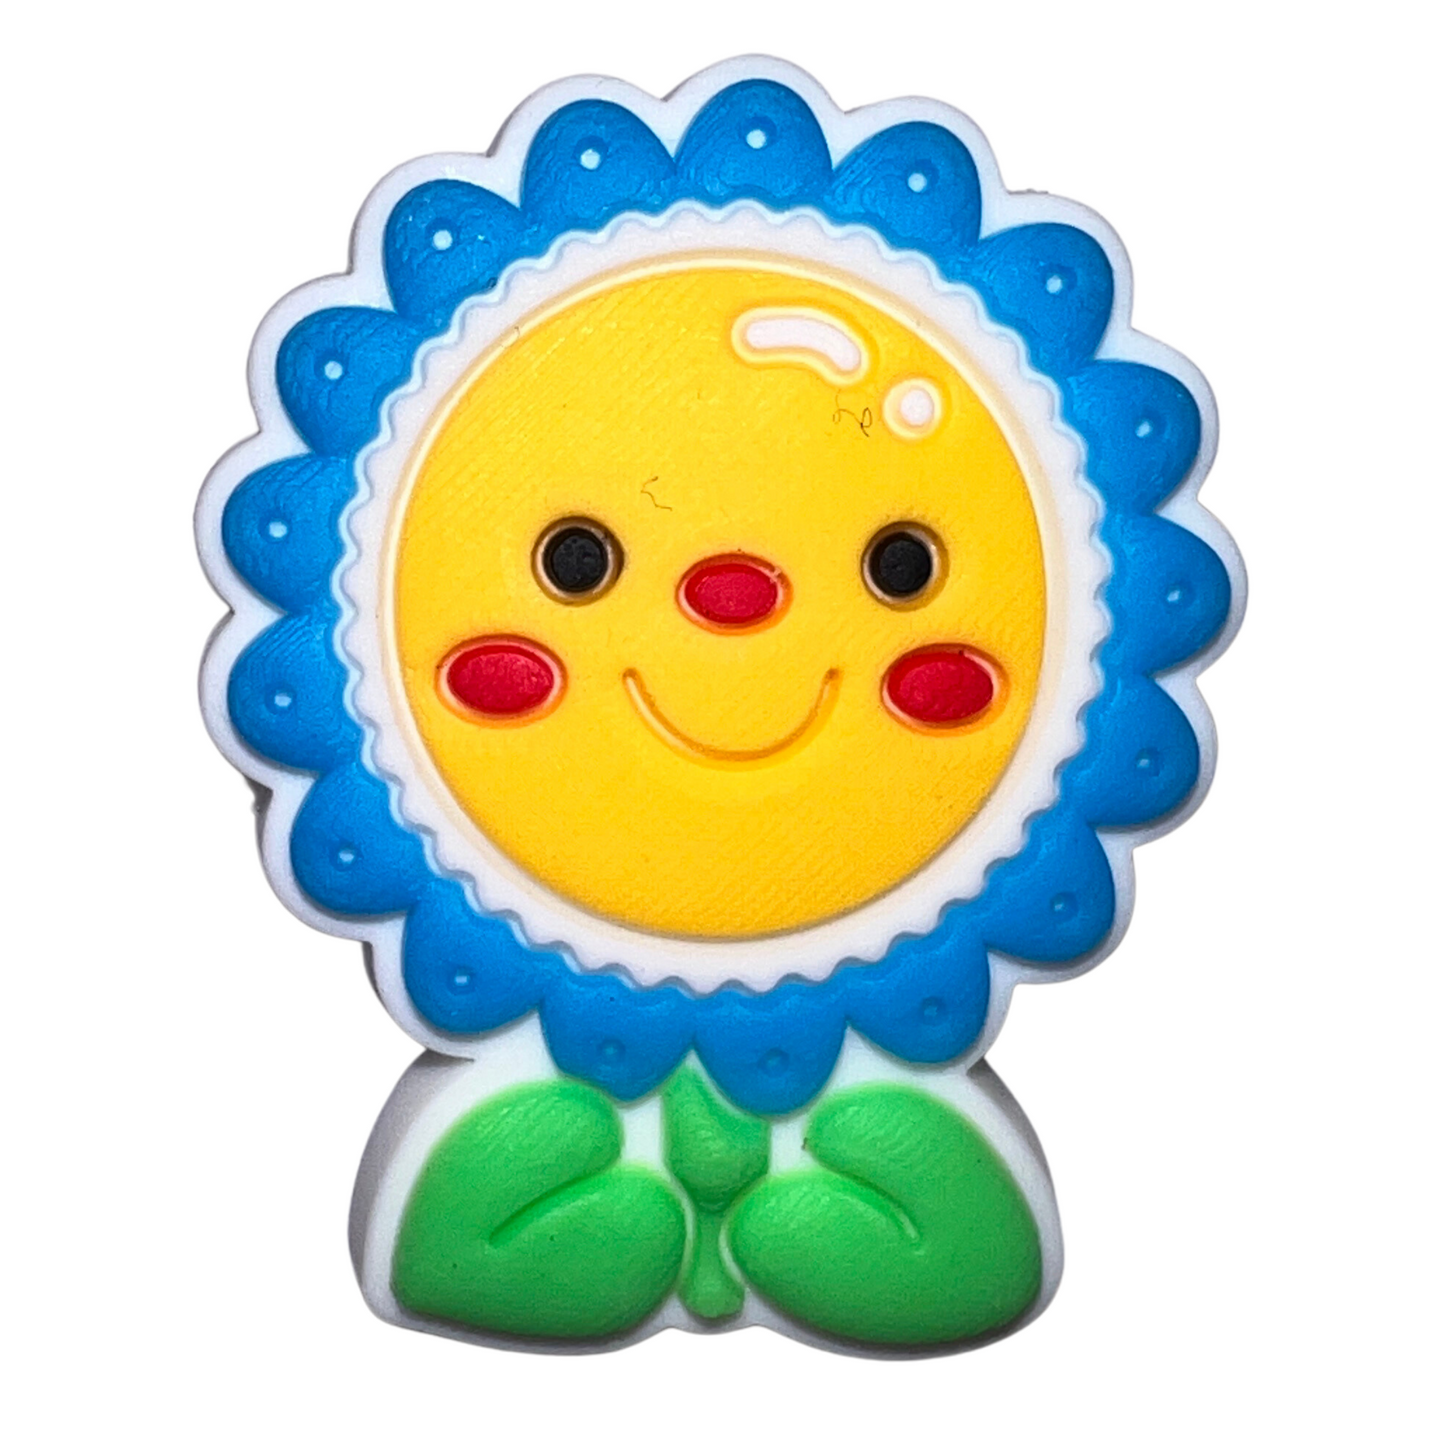 Blue Flower with Yellow Smiley Face